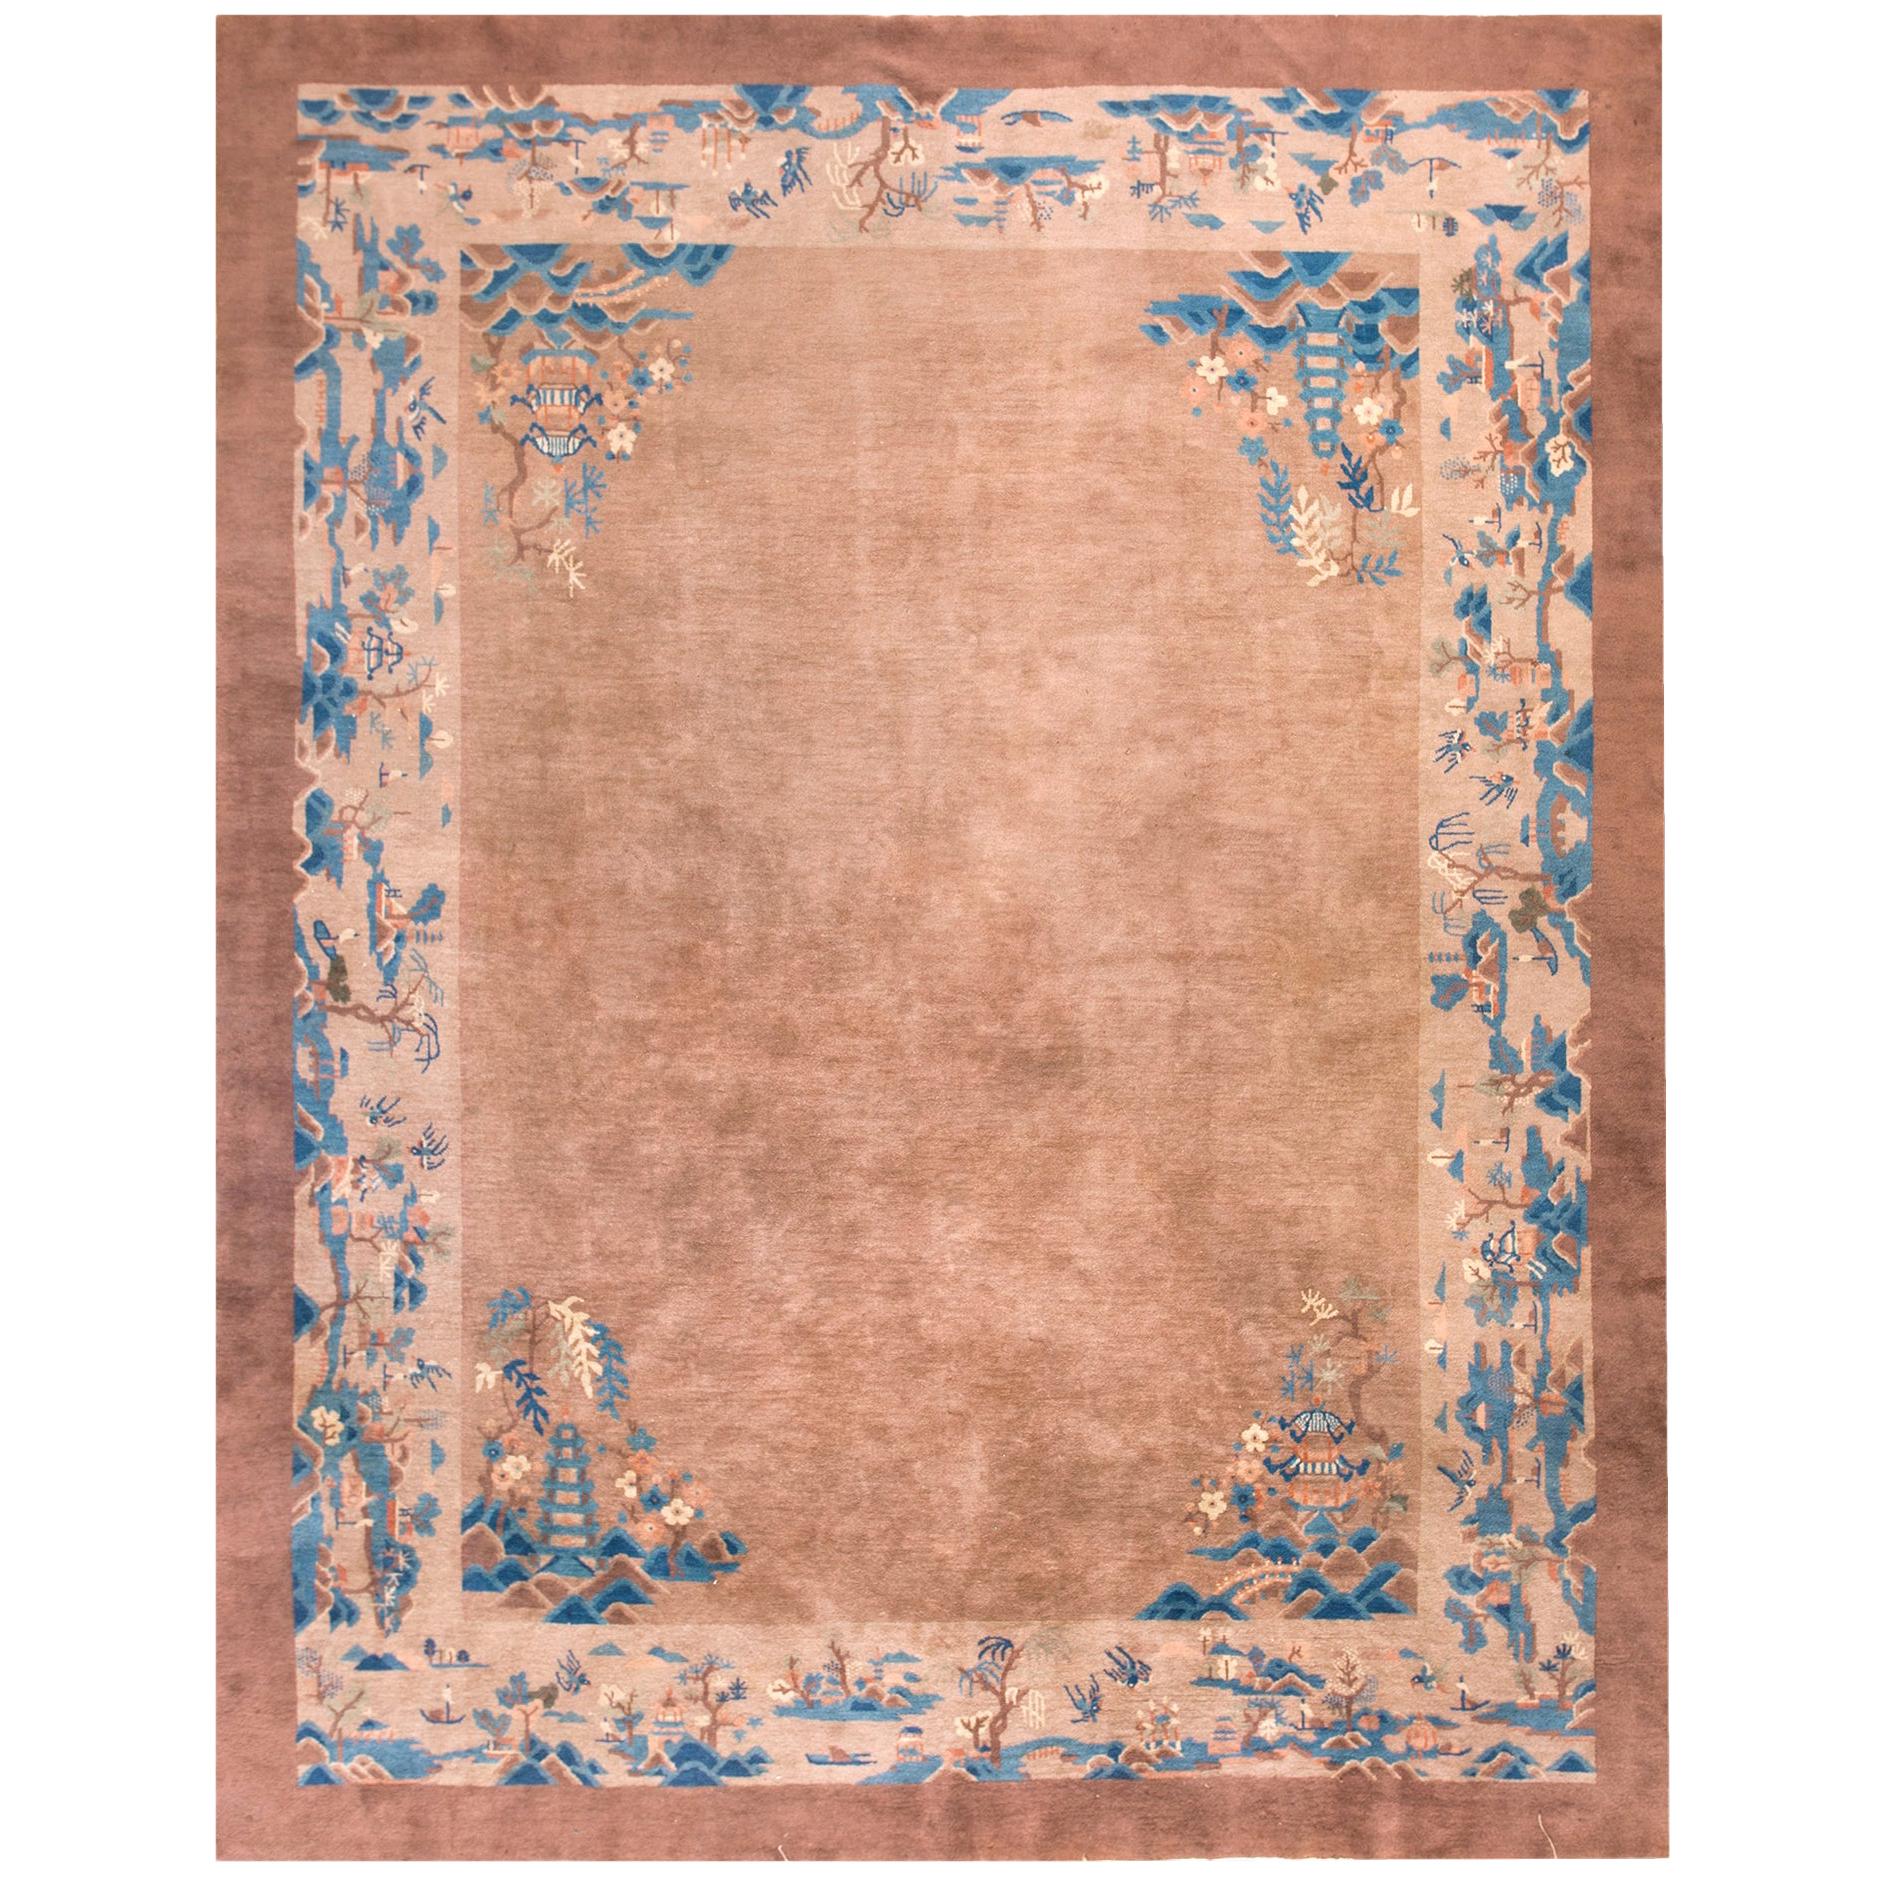 Early 20th Century Chinese Peking Carpet ( 8'8" x 10'8" - 265 x 325 ) For Sale